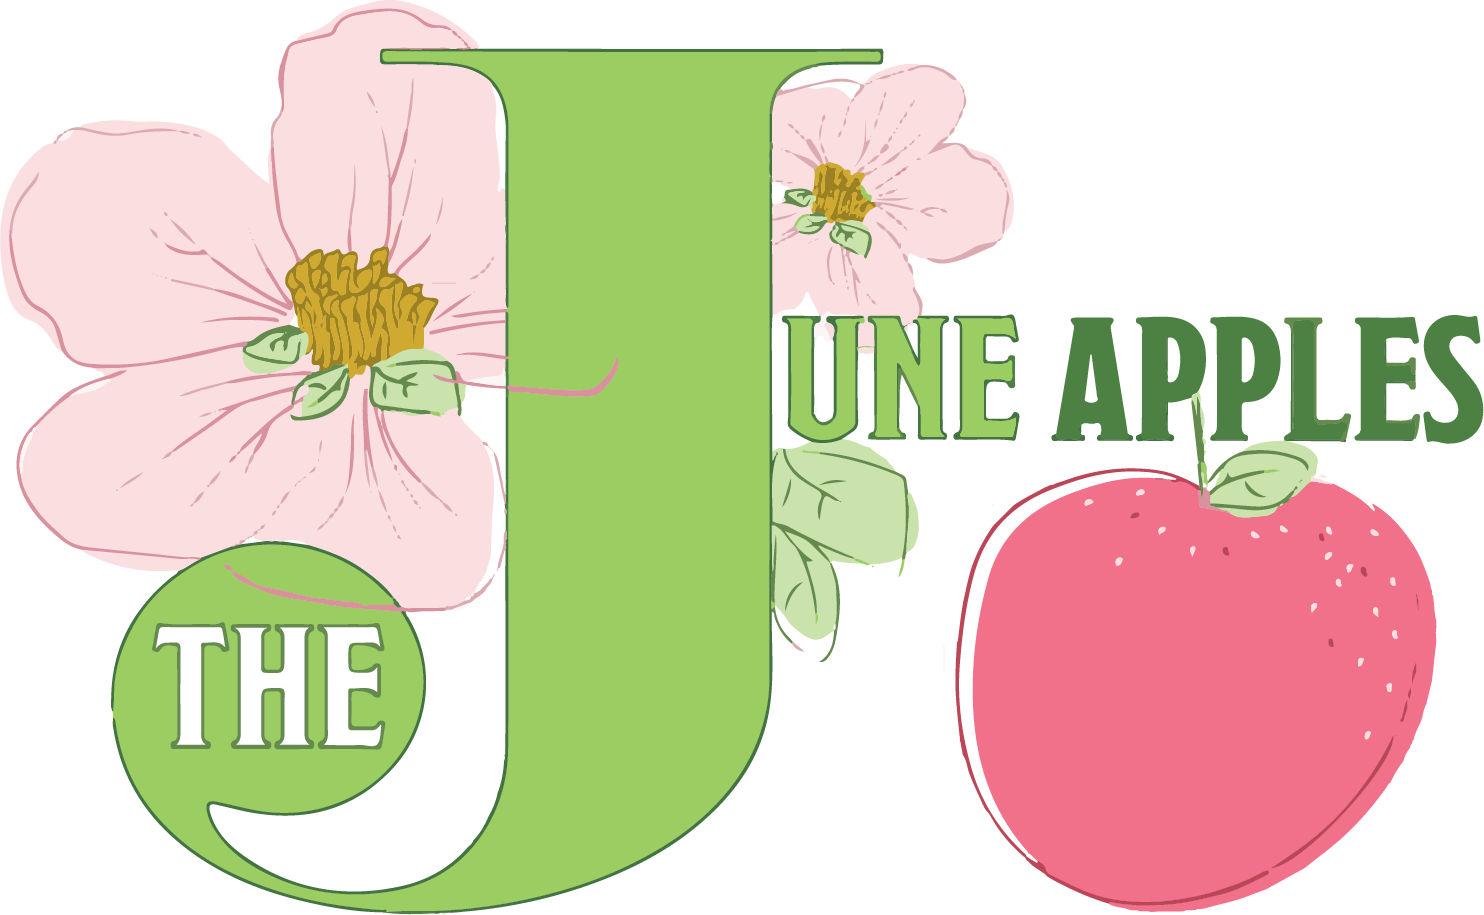 The June Apples